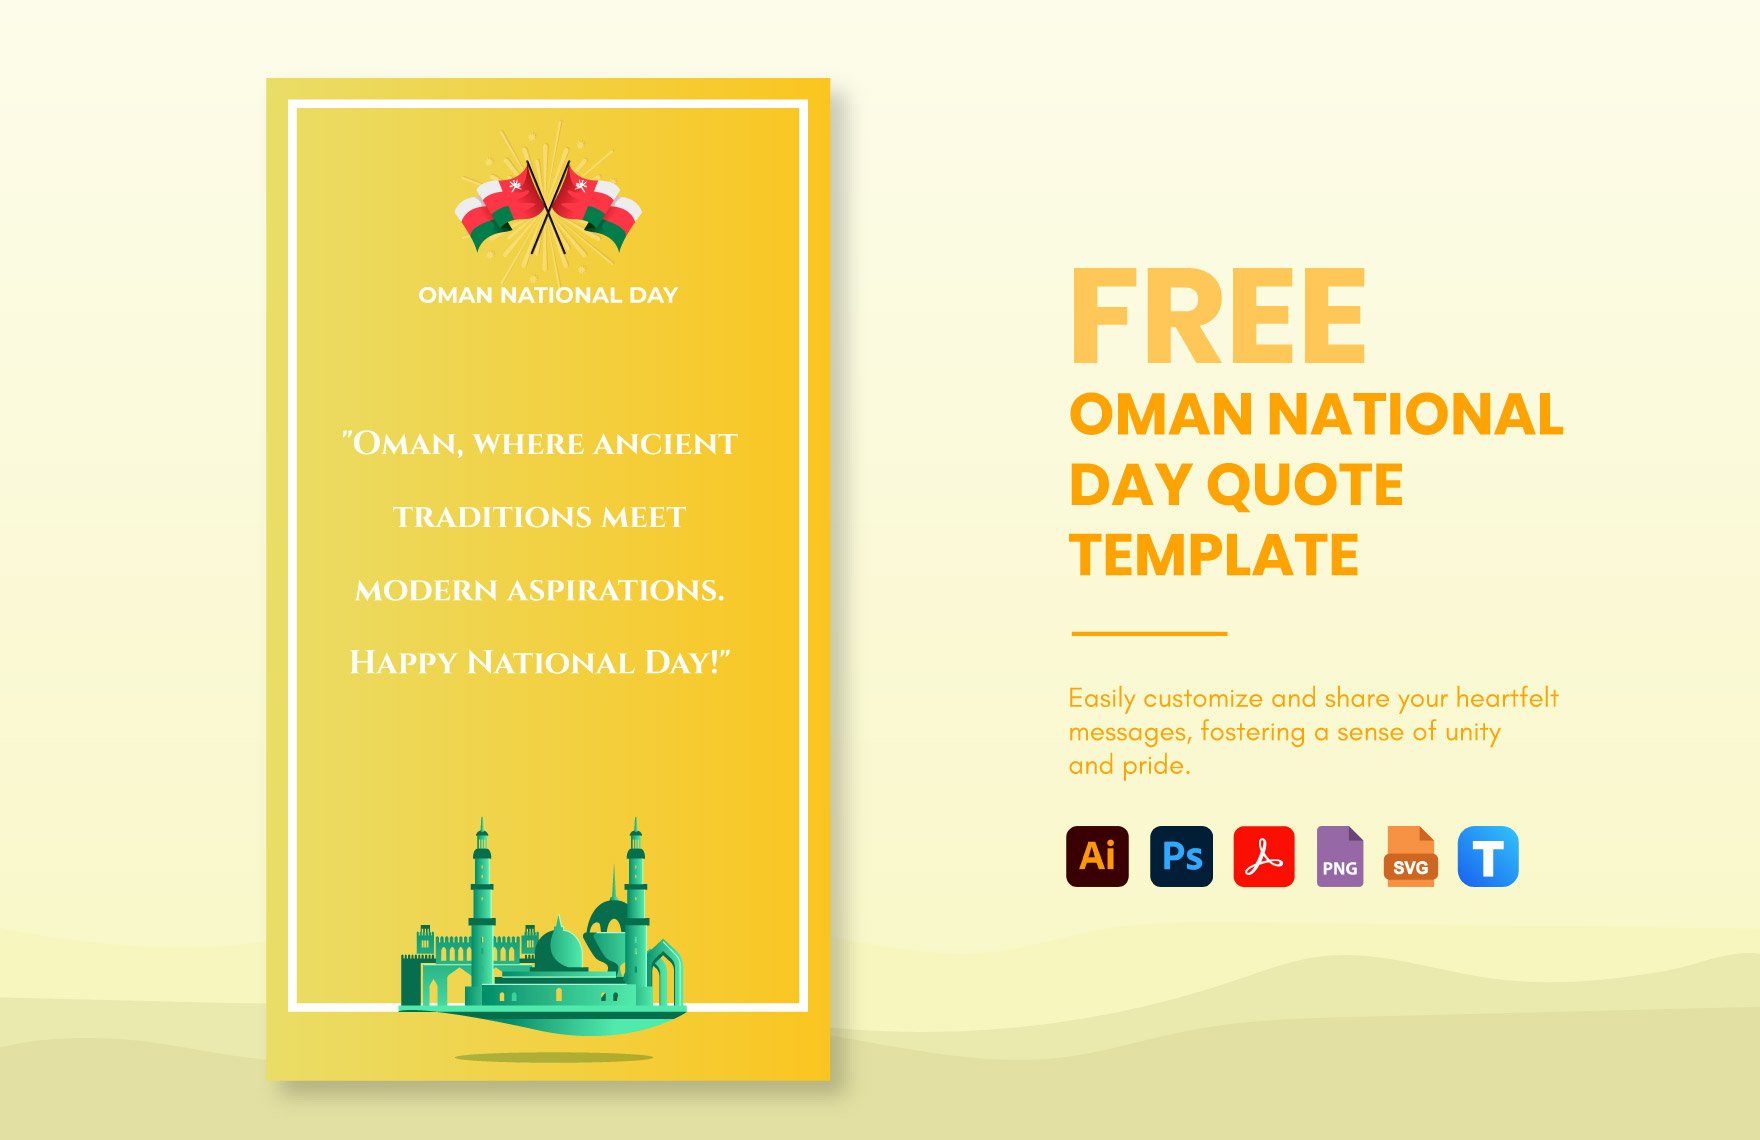 Free Oman National Day Quote in PDF, Illustrator, PSD, SVG, PNG